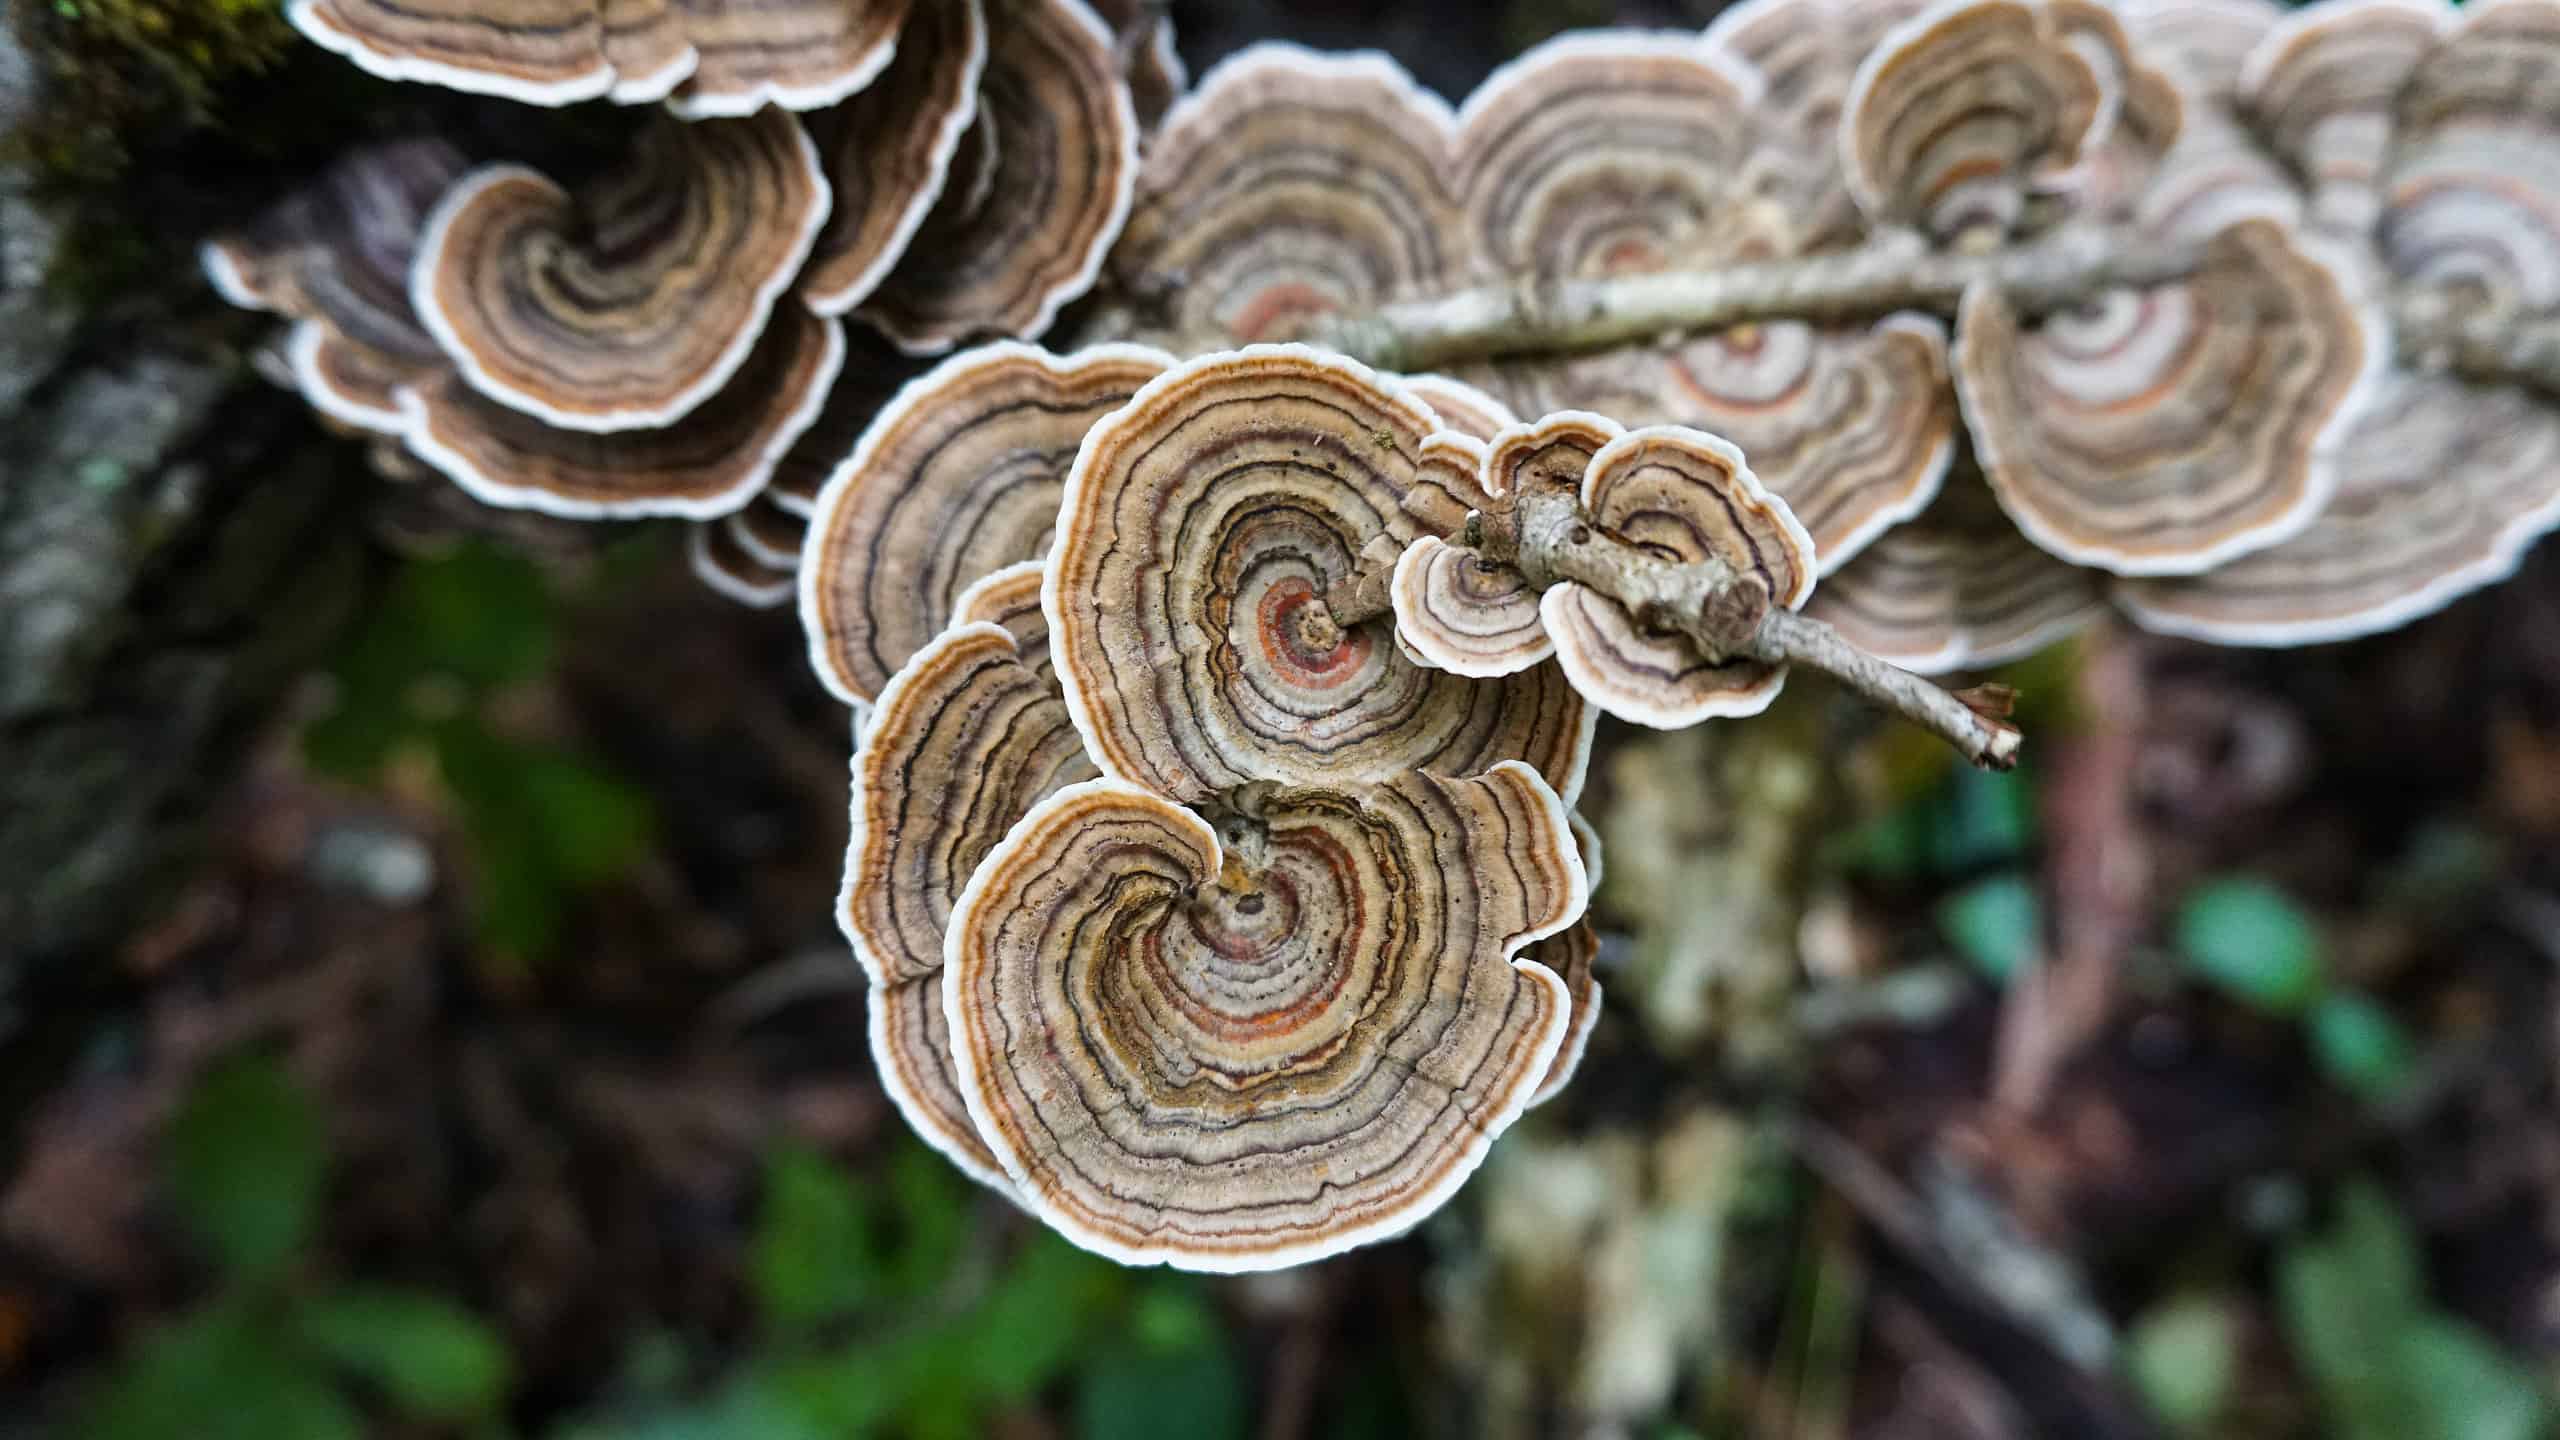 Turkey tail fungus growing in the wild